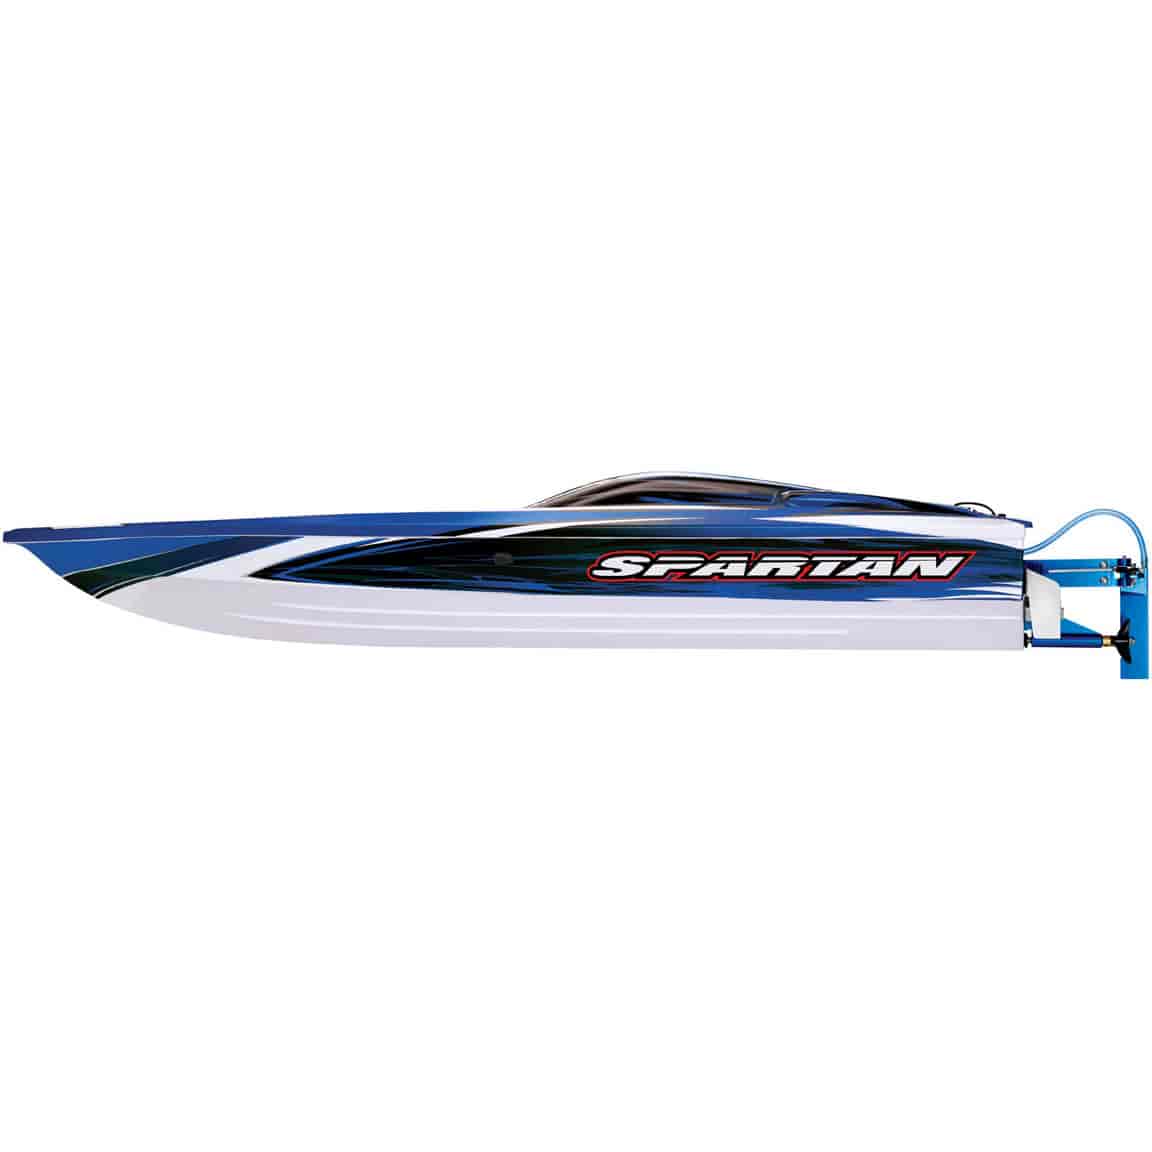 Spartan Brushless Race Boat Fully Assembled, Ready-To-Race 50+ MPH